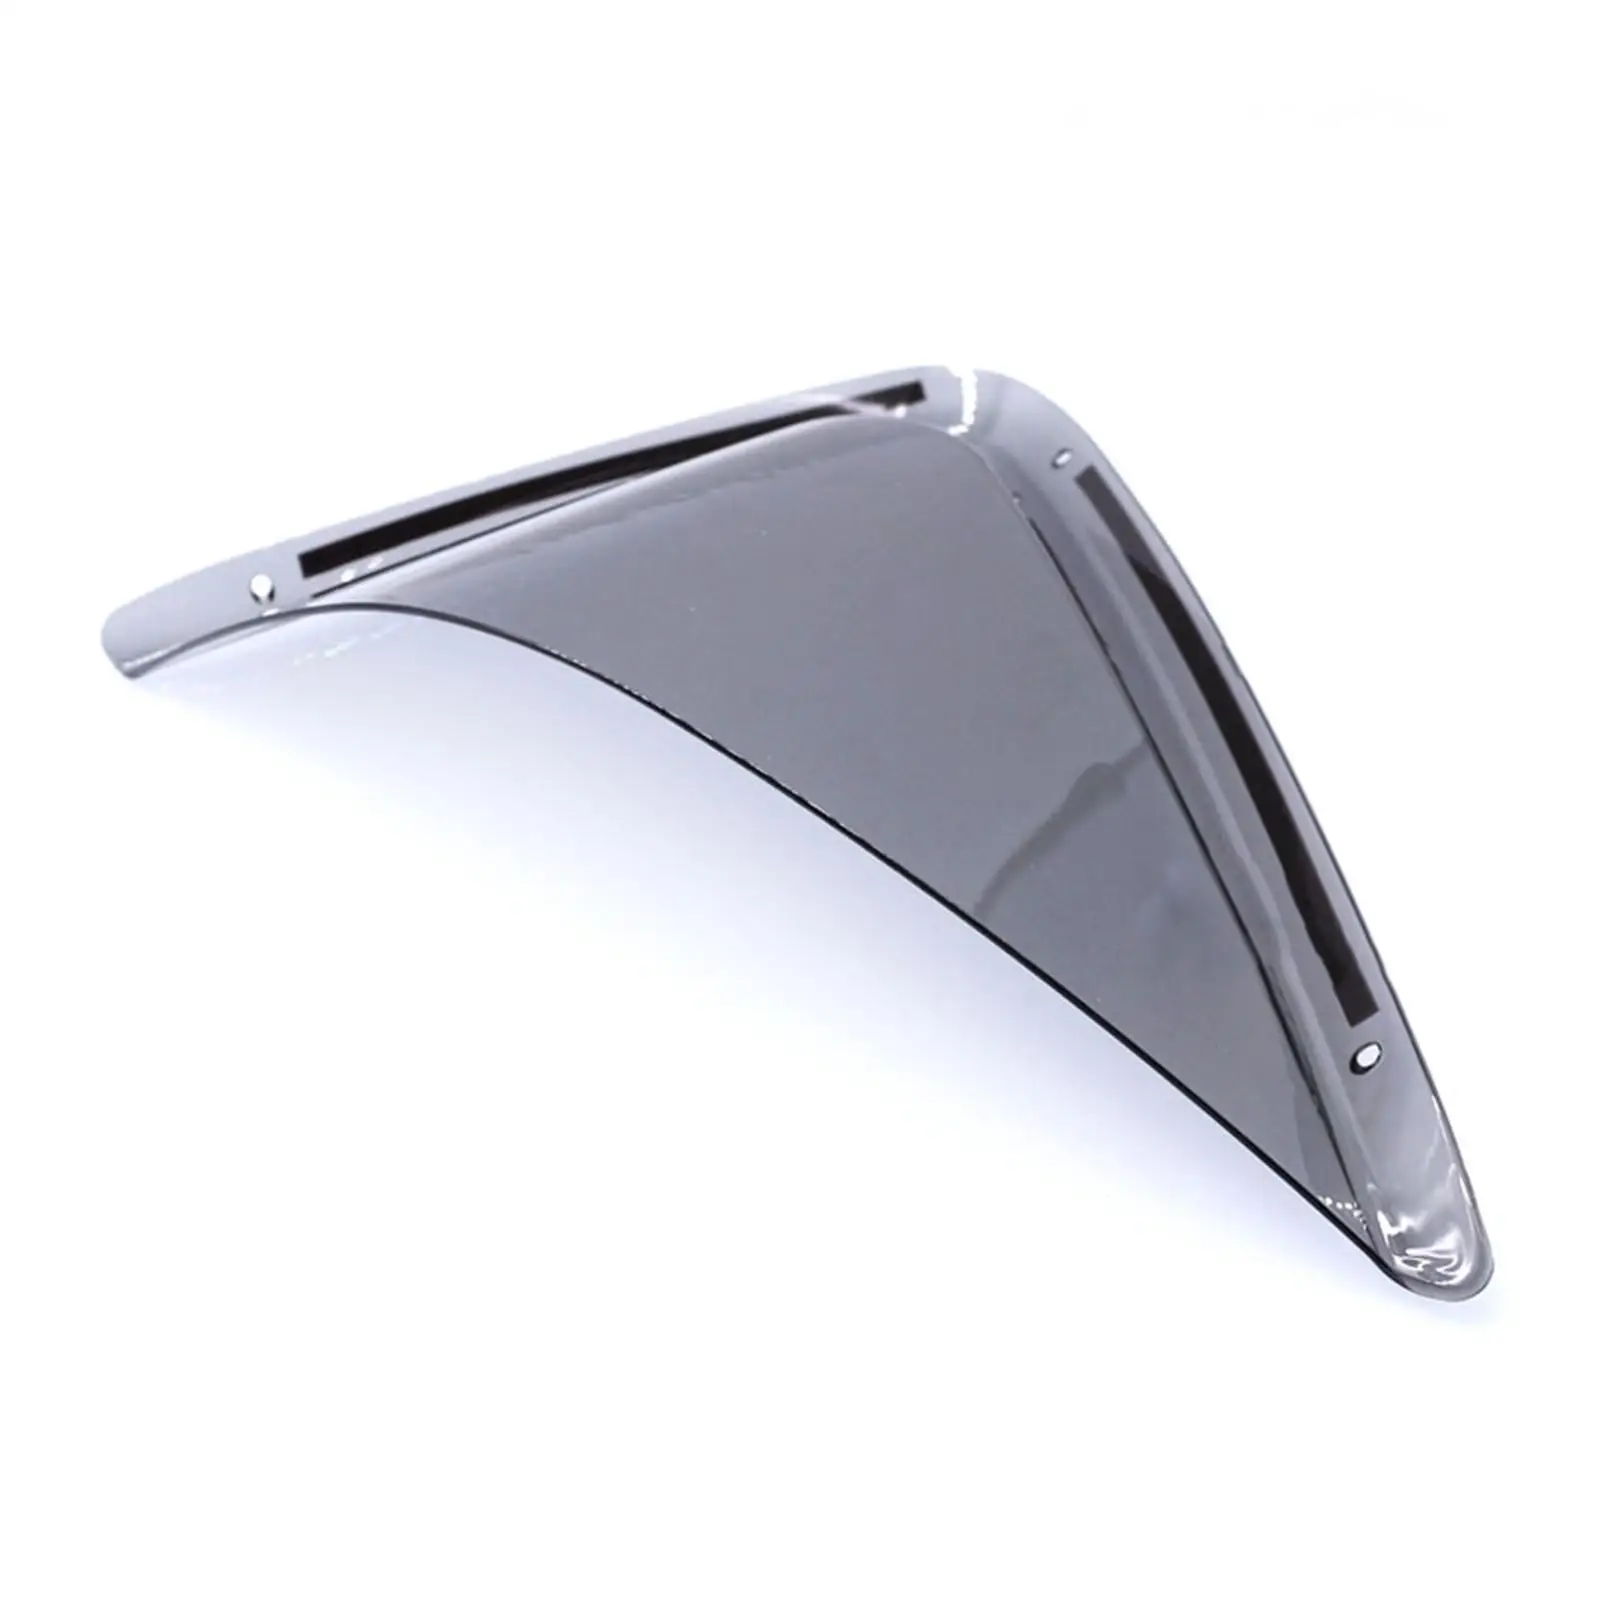 Leg Wind Deflector Motorcycle Replacement Side Board for 150